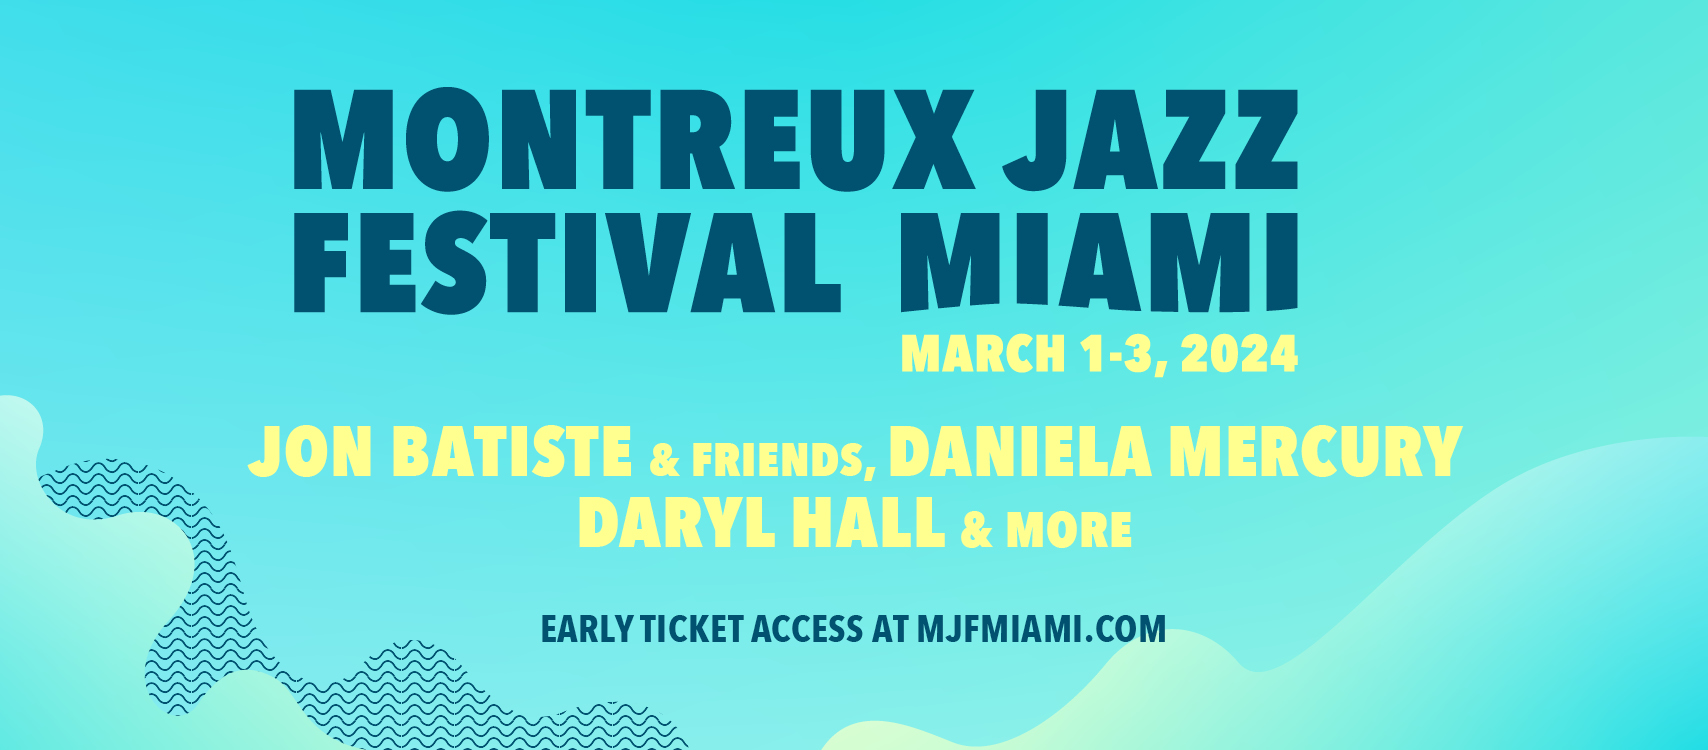 MONTREUX JAZZ FESTIVAL MIAMI To Debut March 1-3, 2024 With Headliners Jon Batiste, Daryl Hall And Daniela Mercury